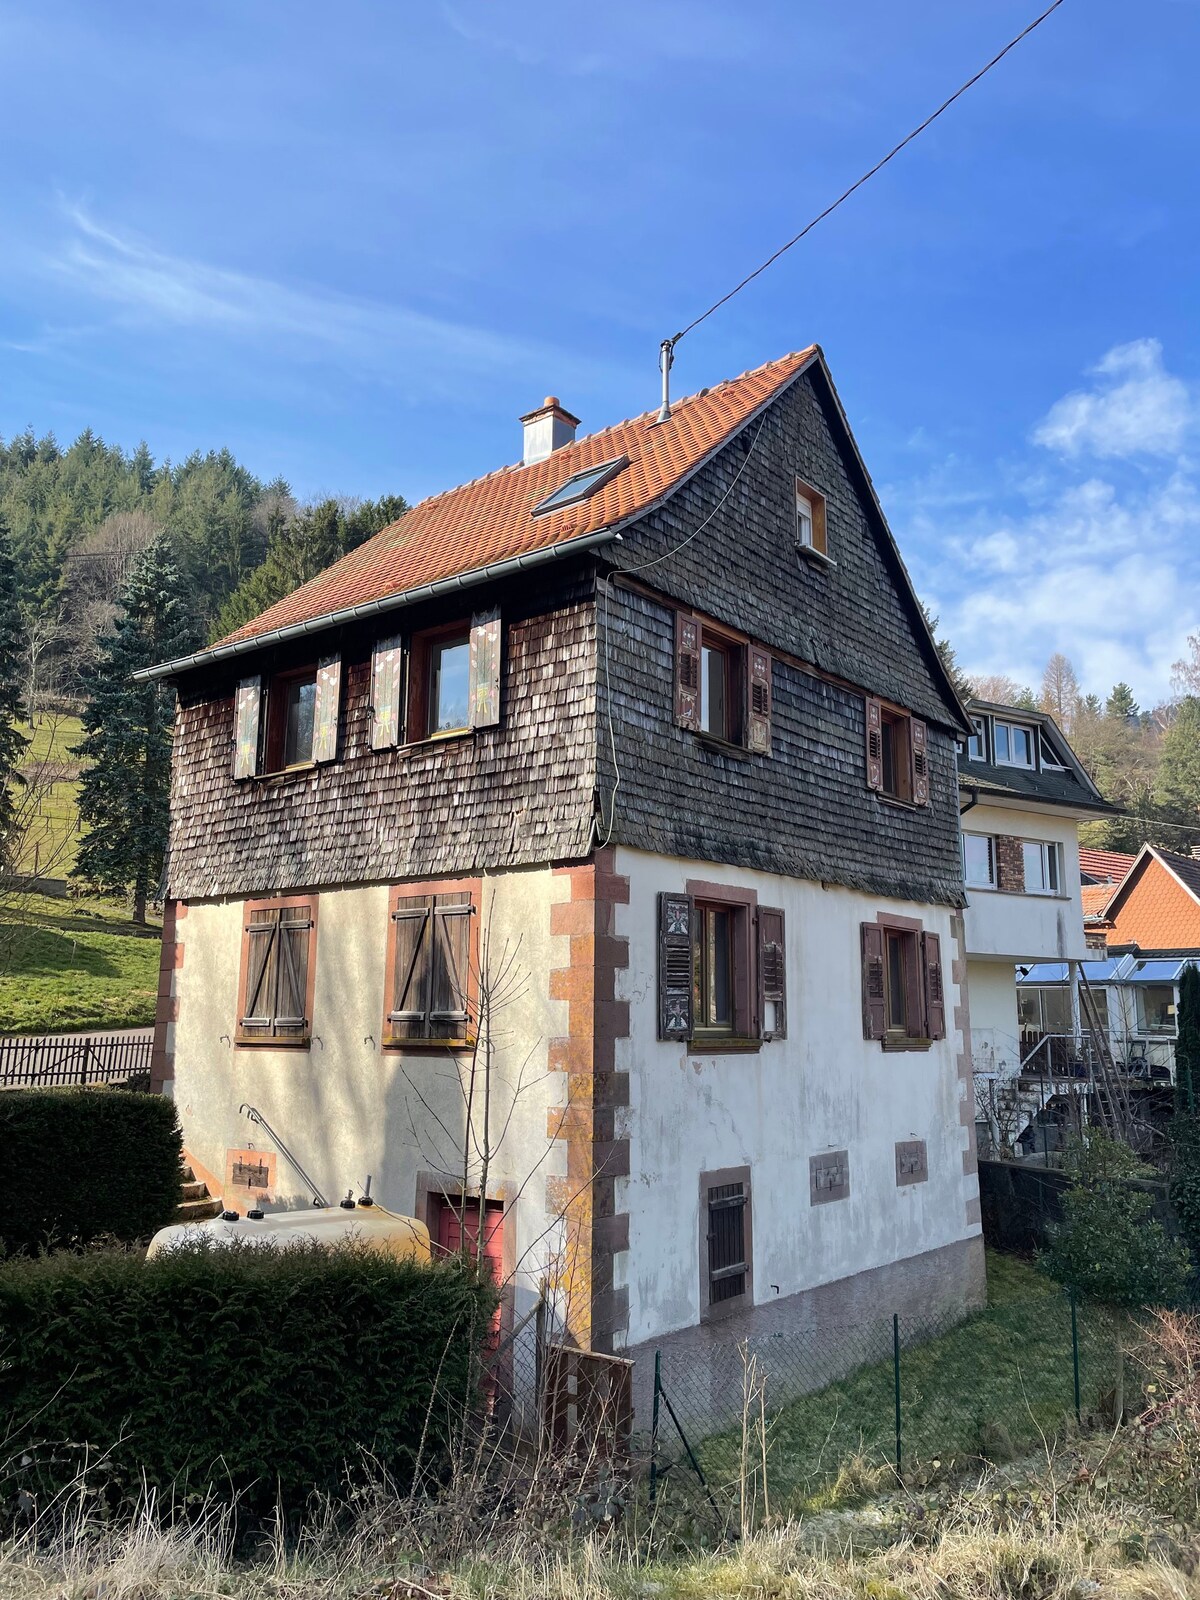 Wangenbourg-Engenthal Vacation Rentals & Homes - Grand Est, France | Airbnb